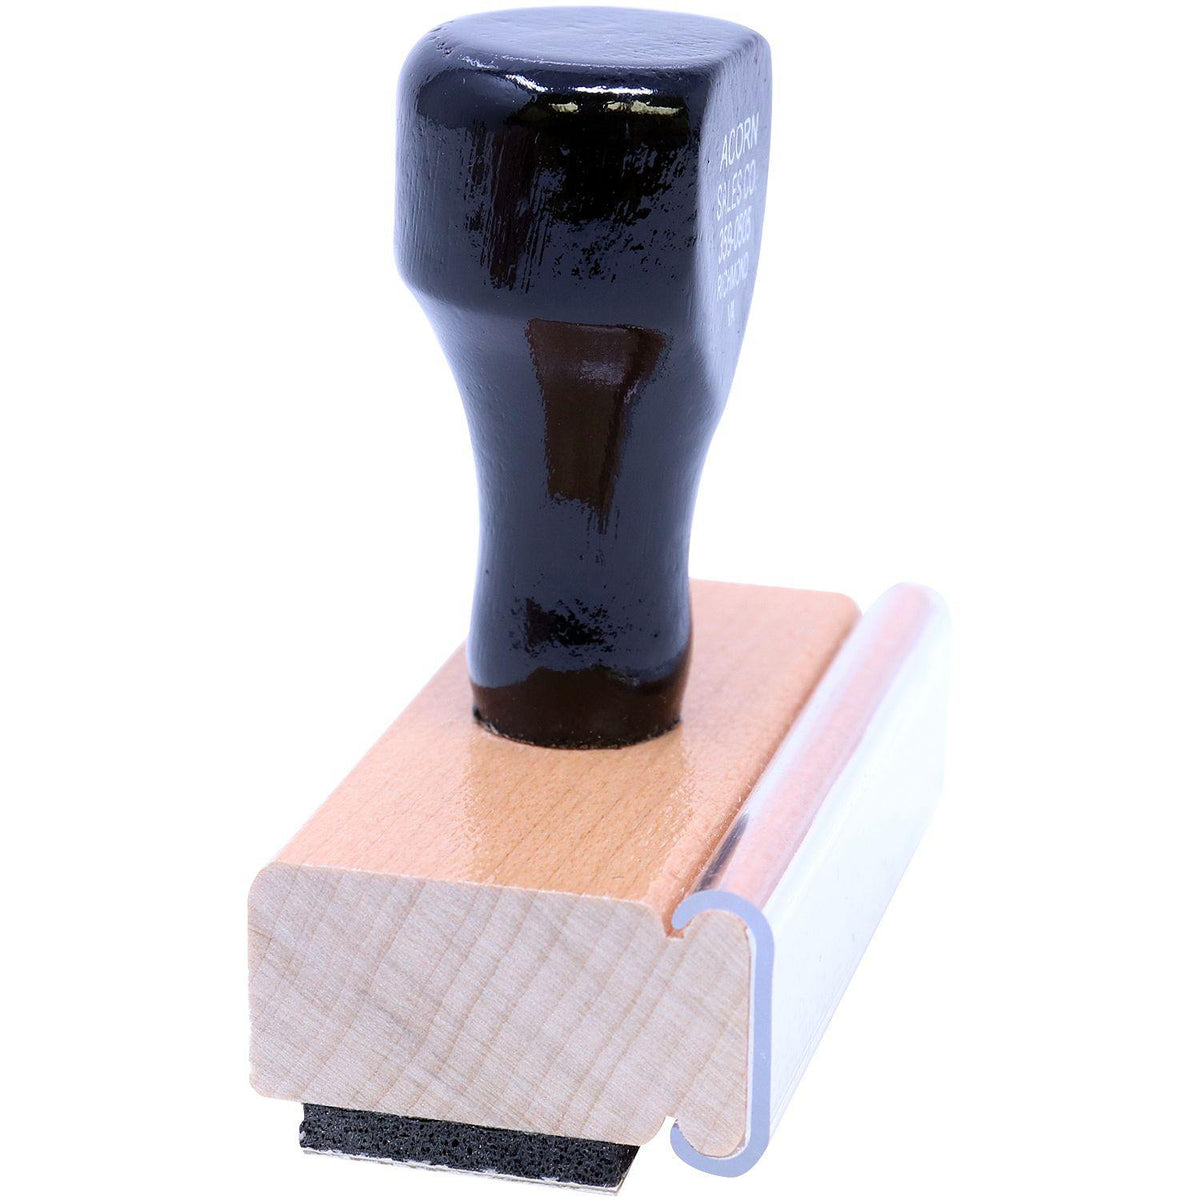 Side View of Bold Completed Rubber Stamp at an Angle